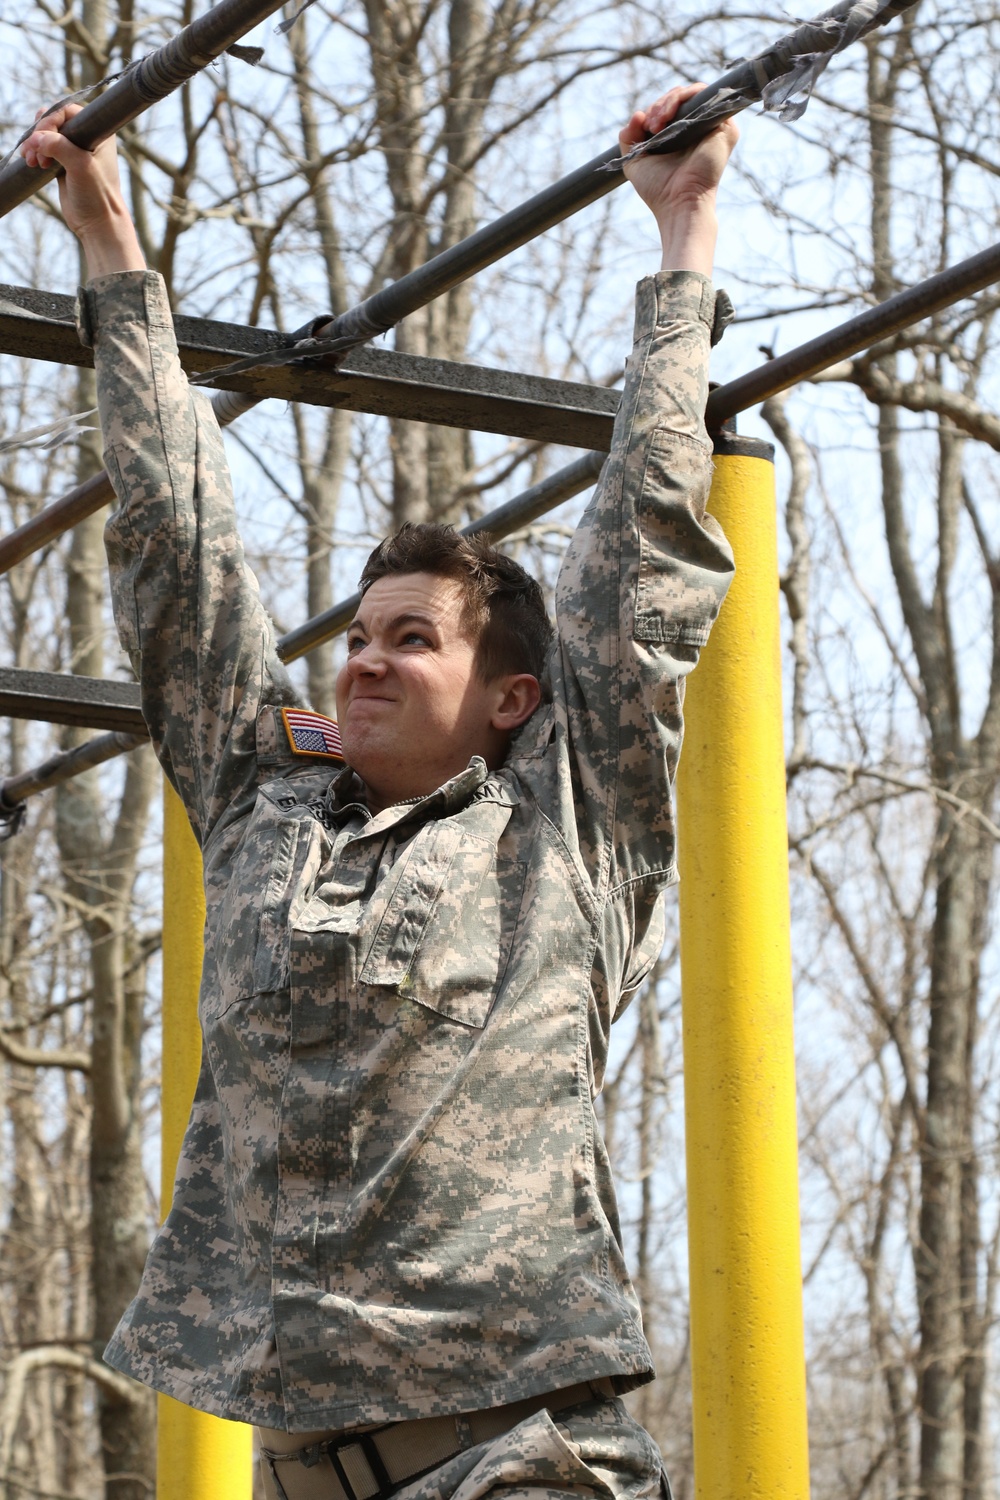 84th Training Command Soldier competes for Best Warrior title